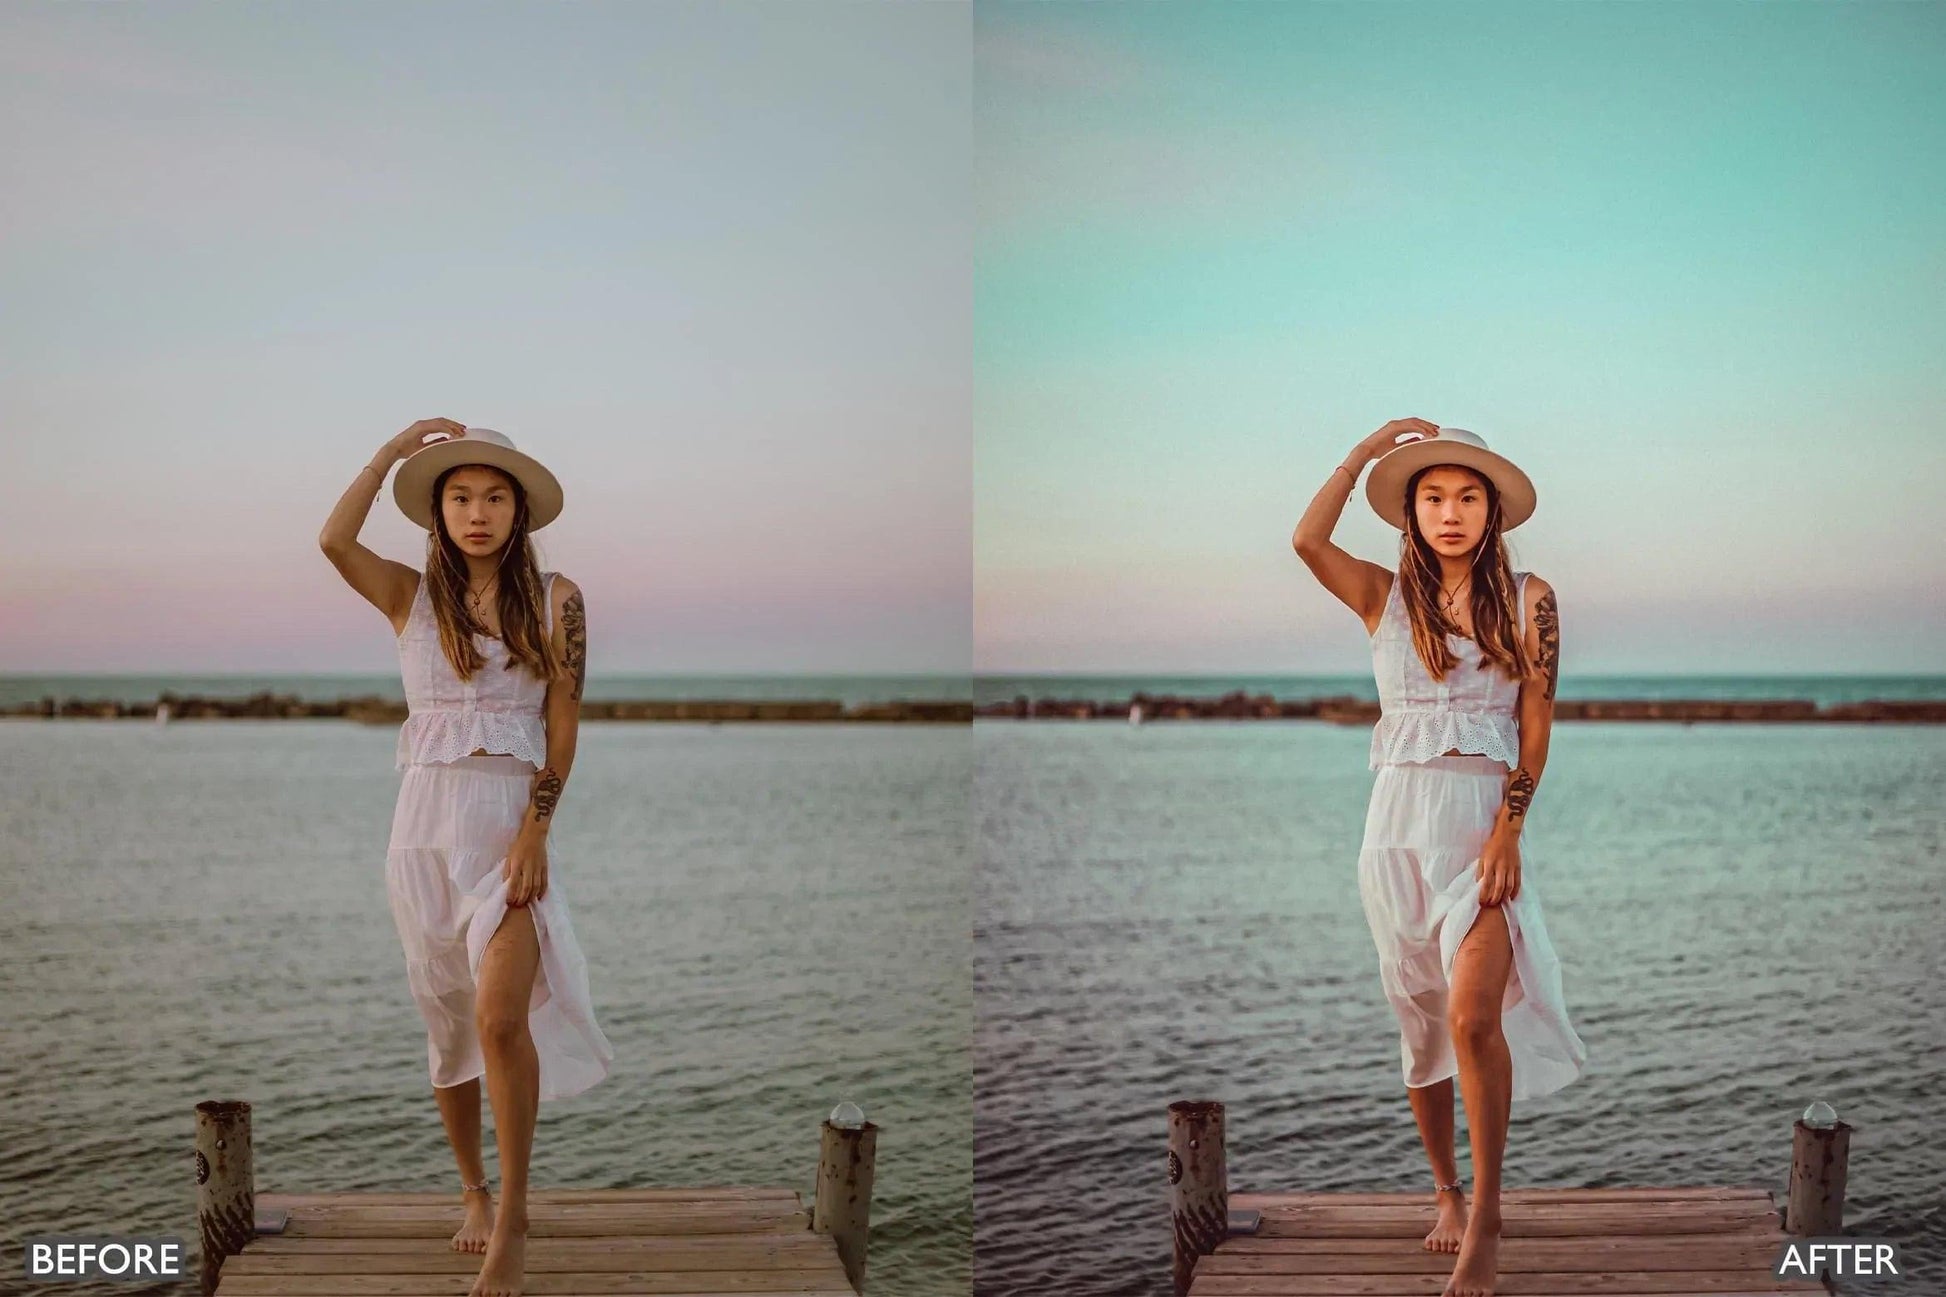 Bright and Airy Lightroom Presets - adobe lightroom presets, black presets, bright presets, brown presets, Cinematic Presets, instagram presets, lightroom presets, Portrait presets, presets before and after, professional lightroom presets - aaapresets.com